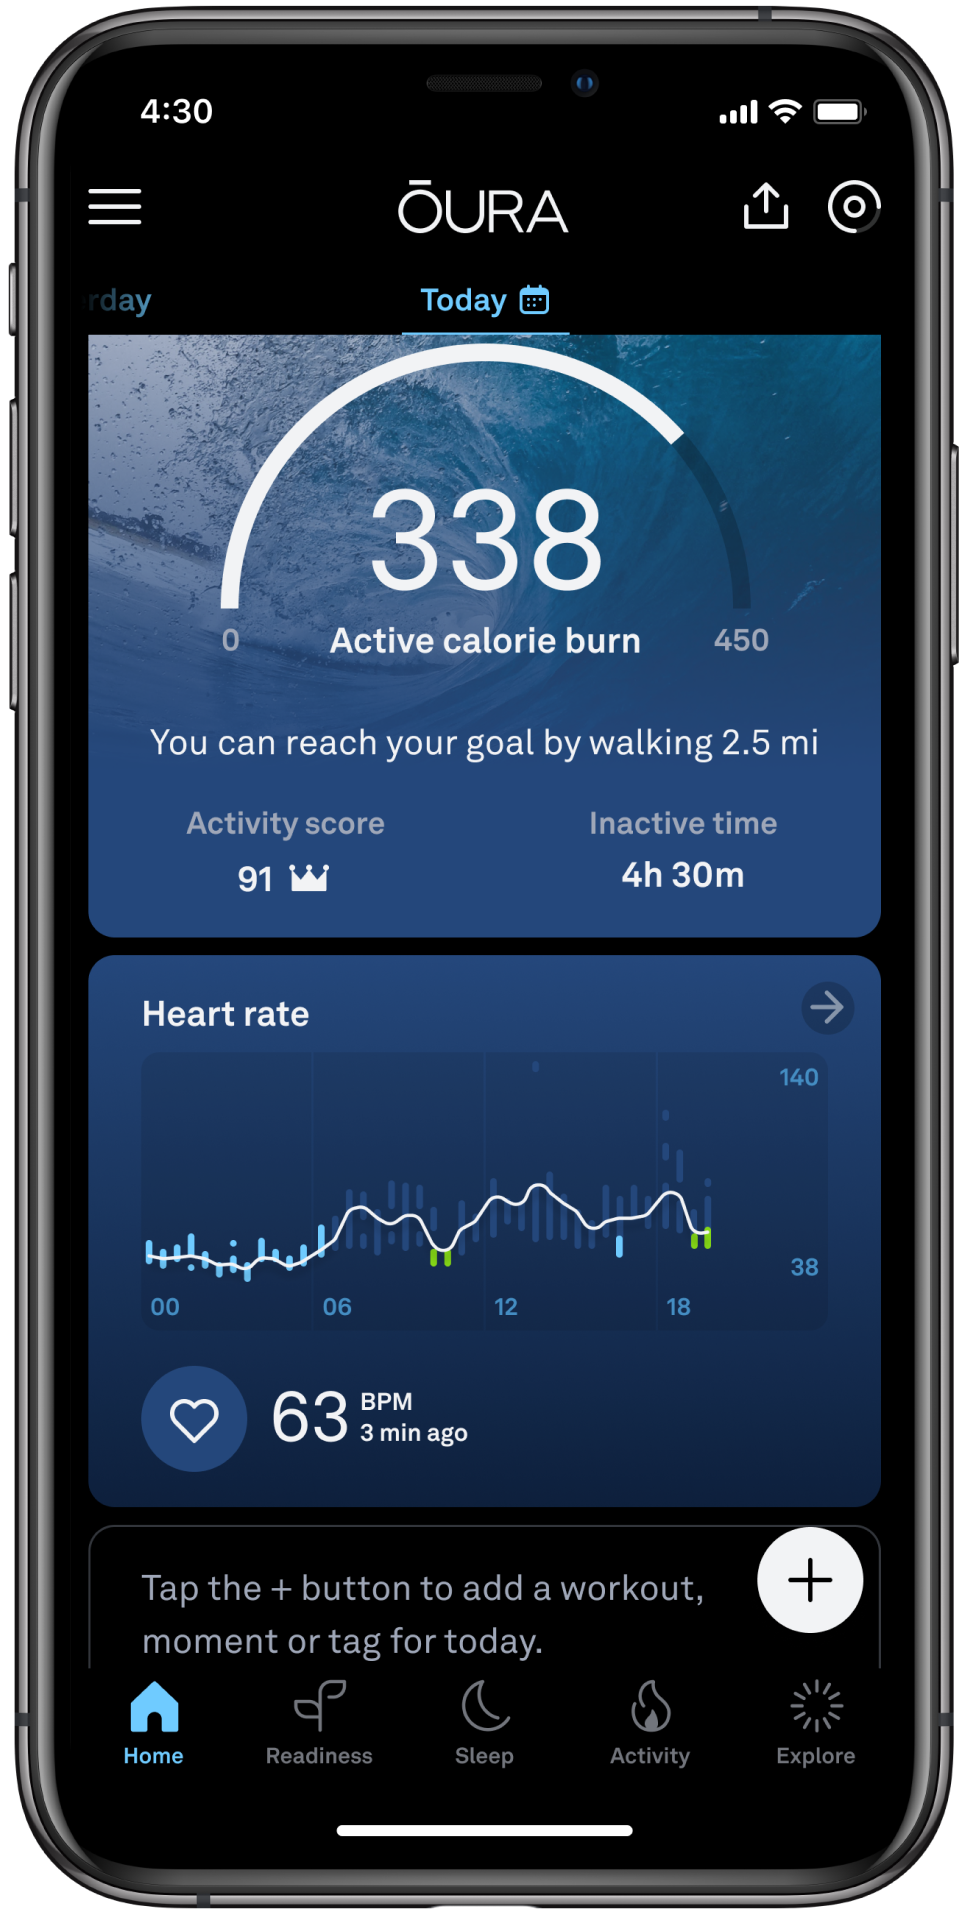 the home screen of the Oura App, displaying the 24 hour heart rate graph. The graph has color coded bar segments, with blue indicating sleephing heart rate, and green indicating moments of restorative time